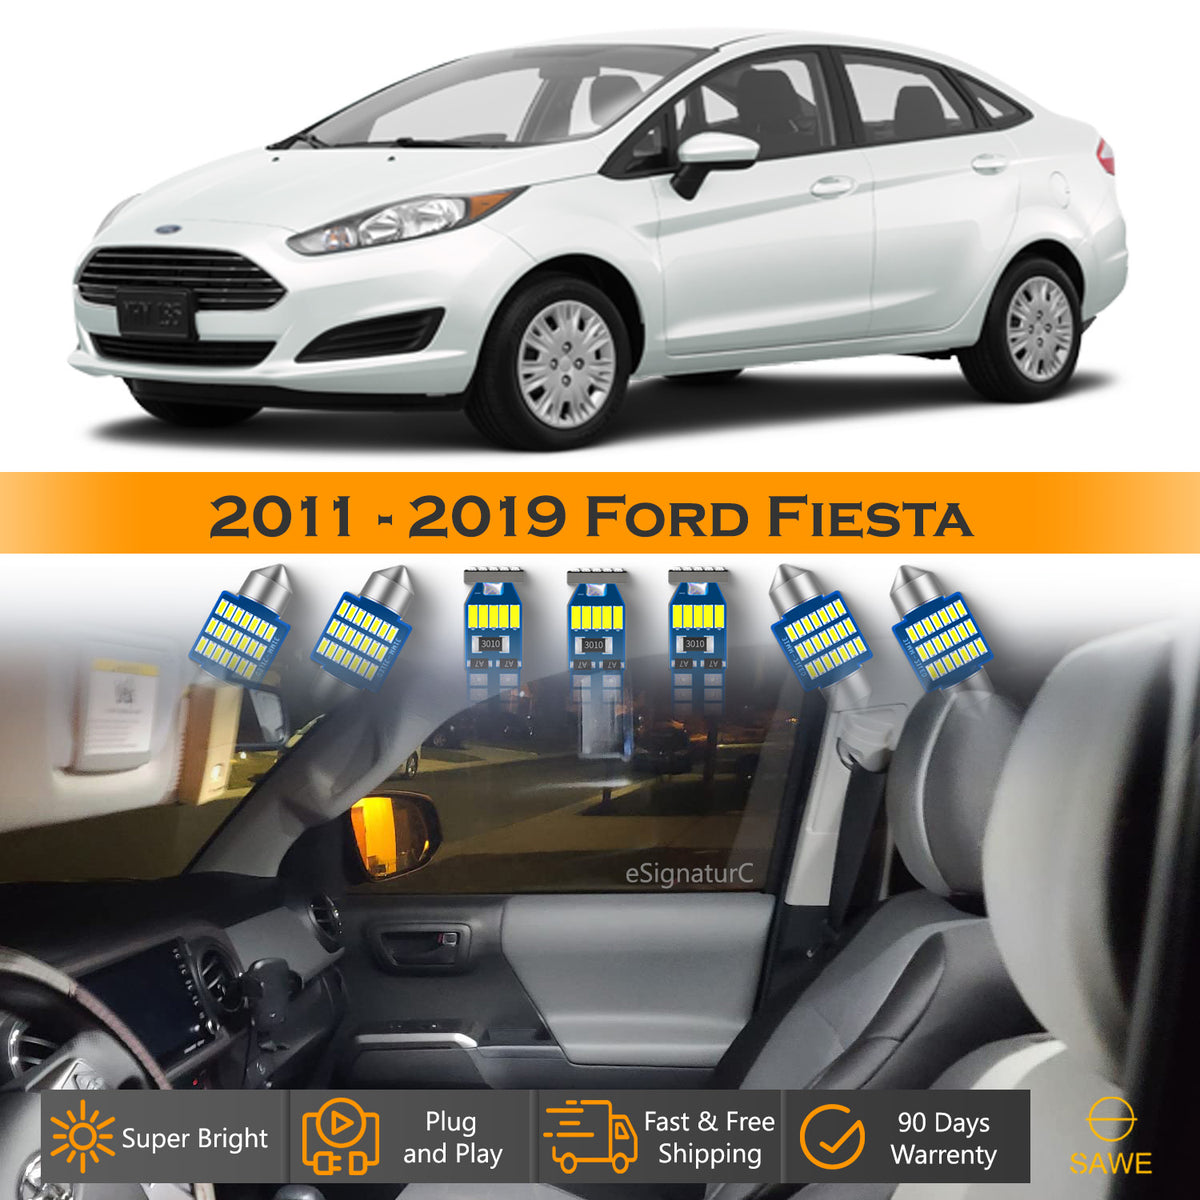 For Ford Fiesta Interior LED Lights - Dome & Map Light Bulbs Package Kit for 2011 - 2019 - White